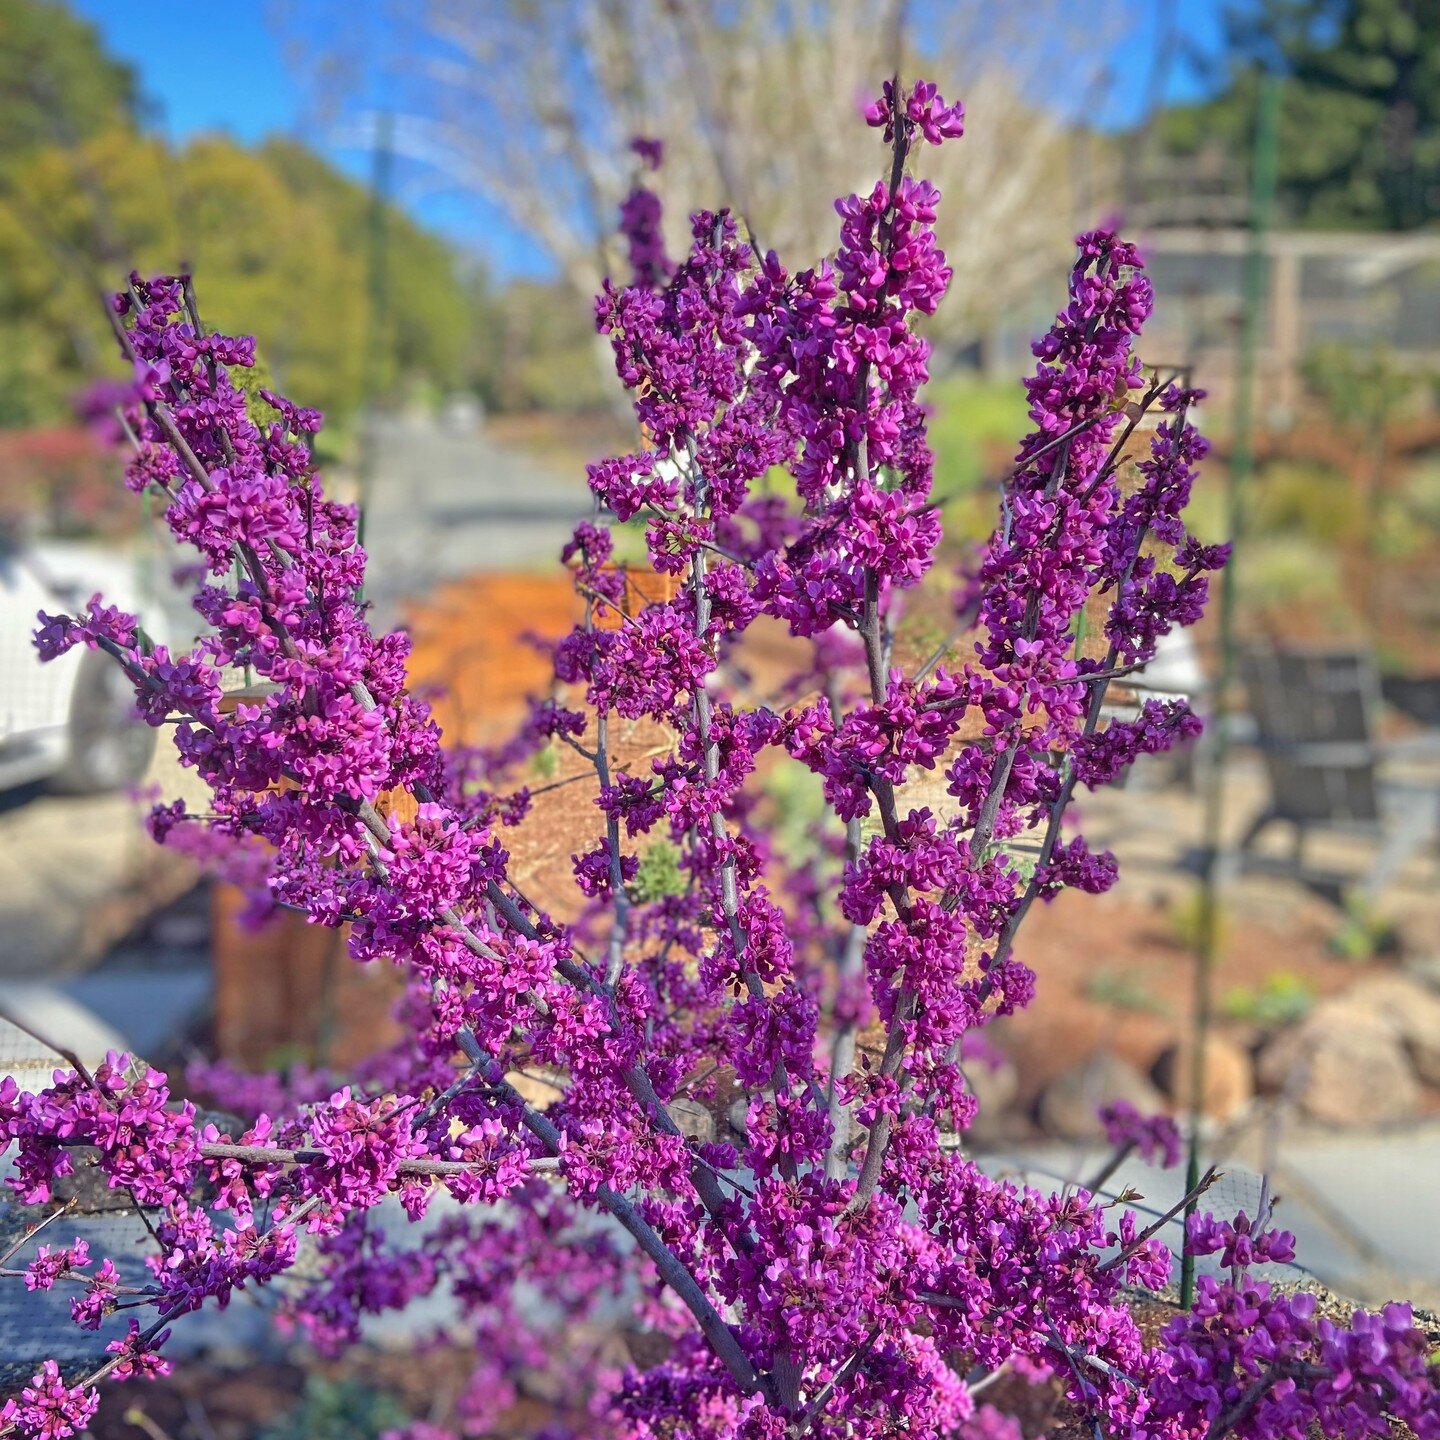 Let us introduce Cercis canadensis texensis 'Oklahoma' - also known as Oklahoma Redbud. This beauty pops rich pink flowers on bare branches to hint of spring's approach. Followed by heart-shaped leaves which are just now beginning to bud. It's a show